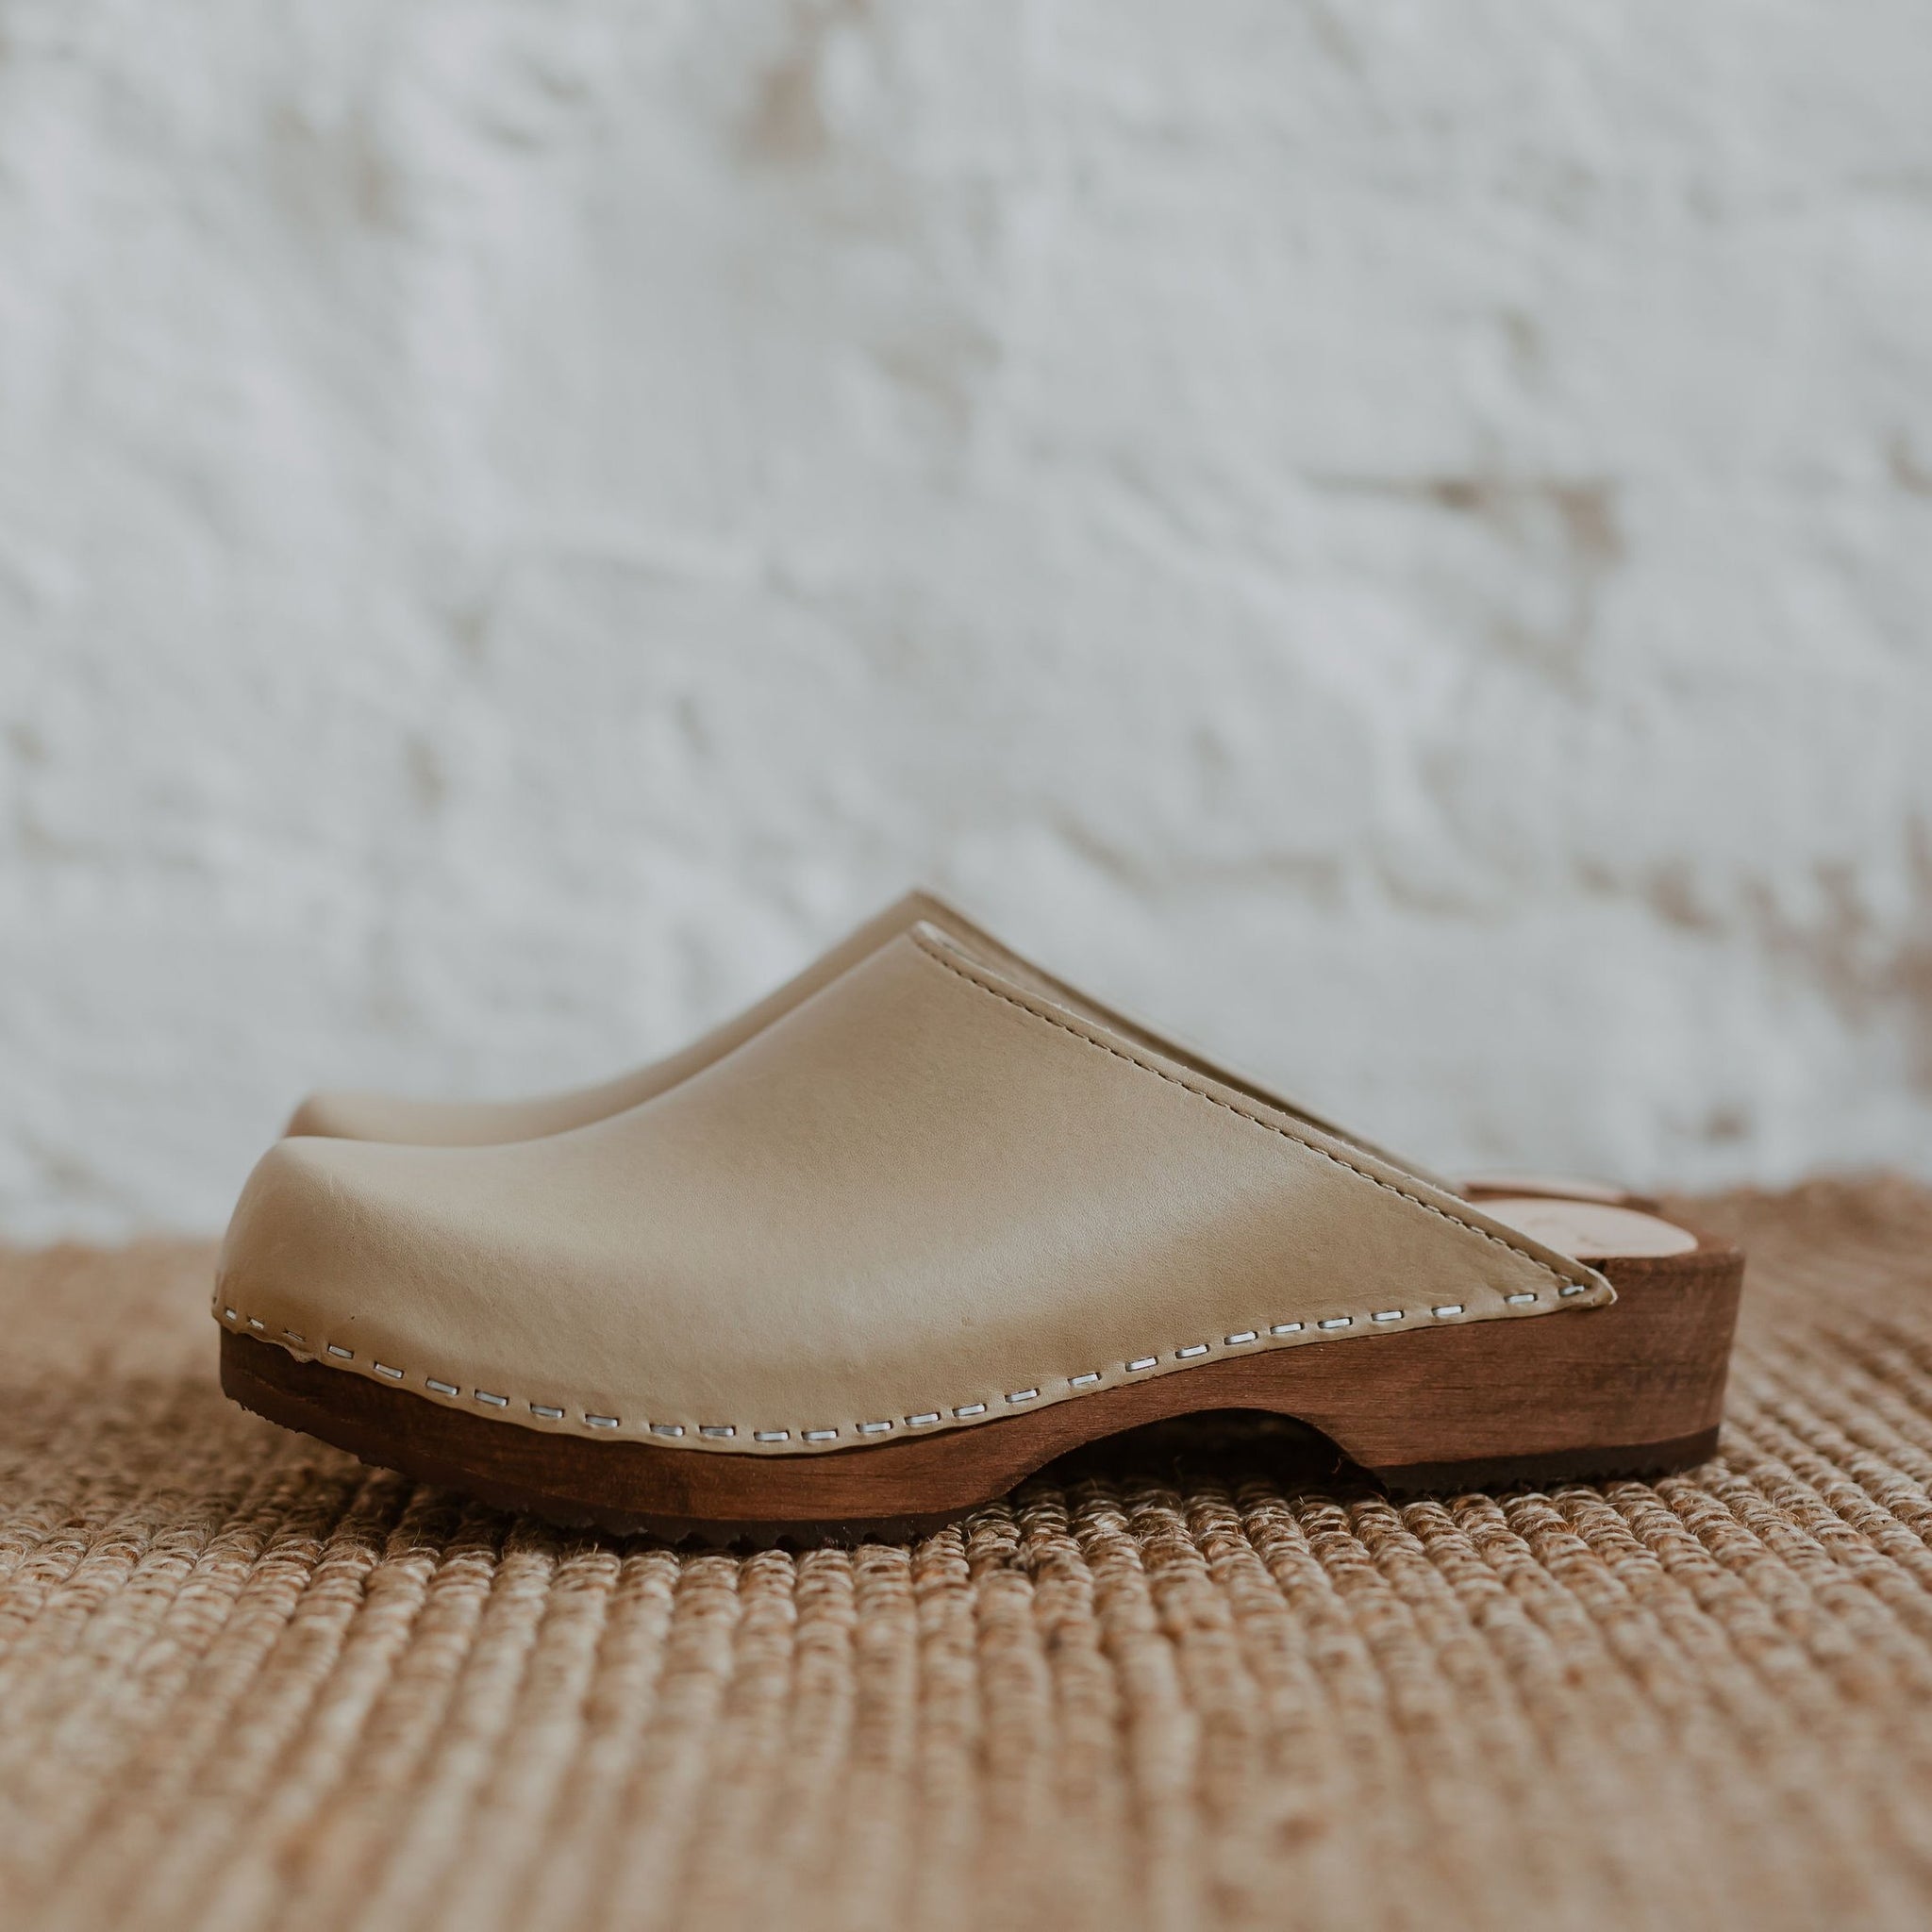 Stone beige classic style swedish clog mule with low wooden base